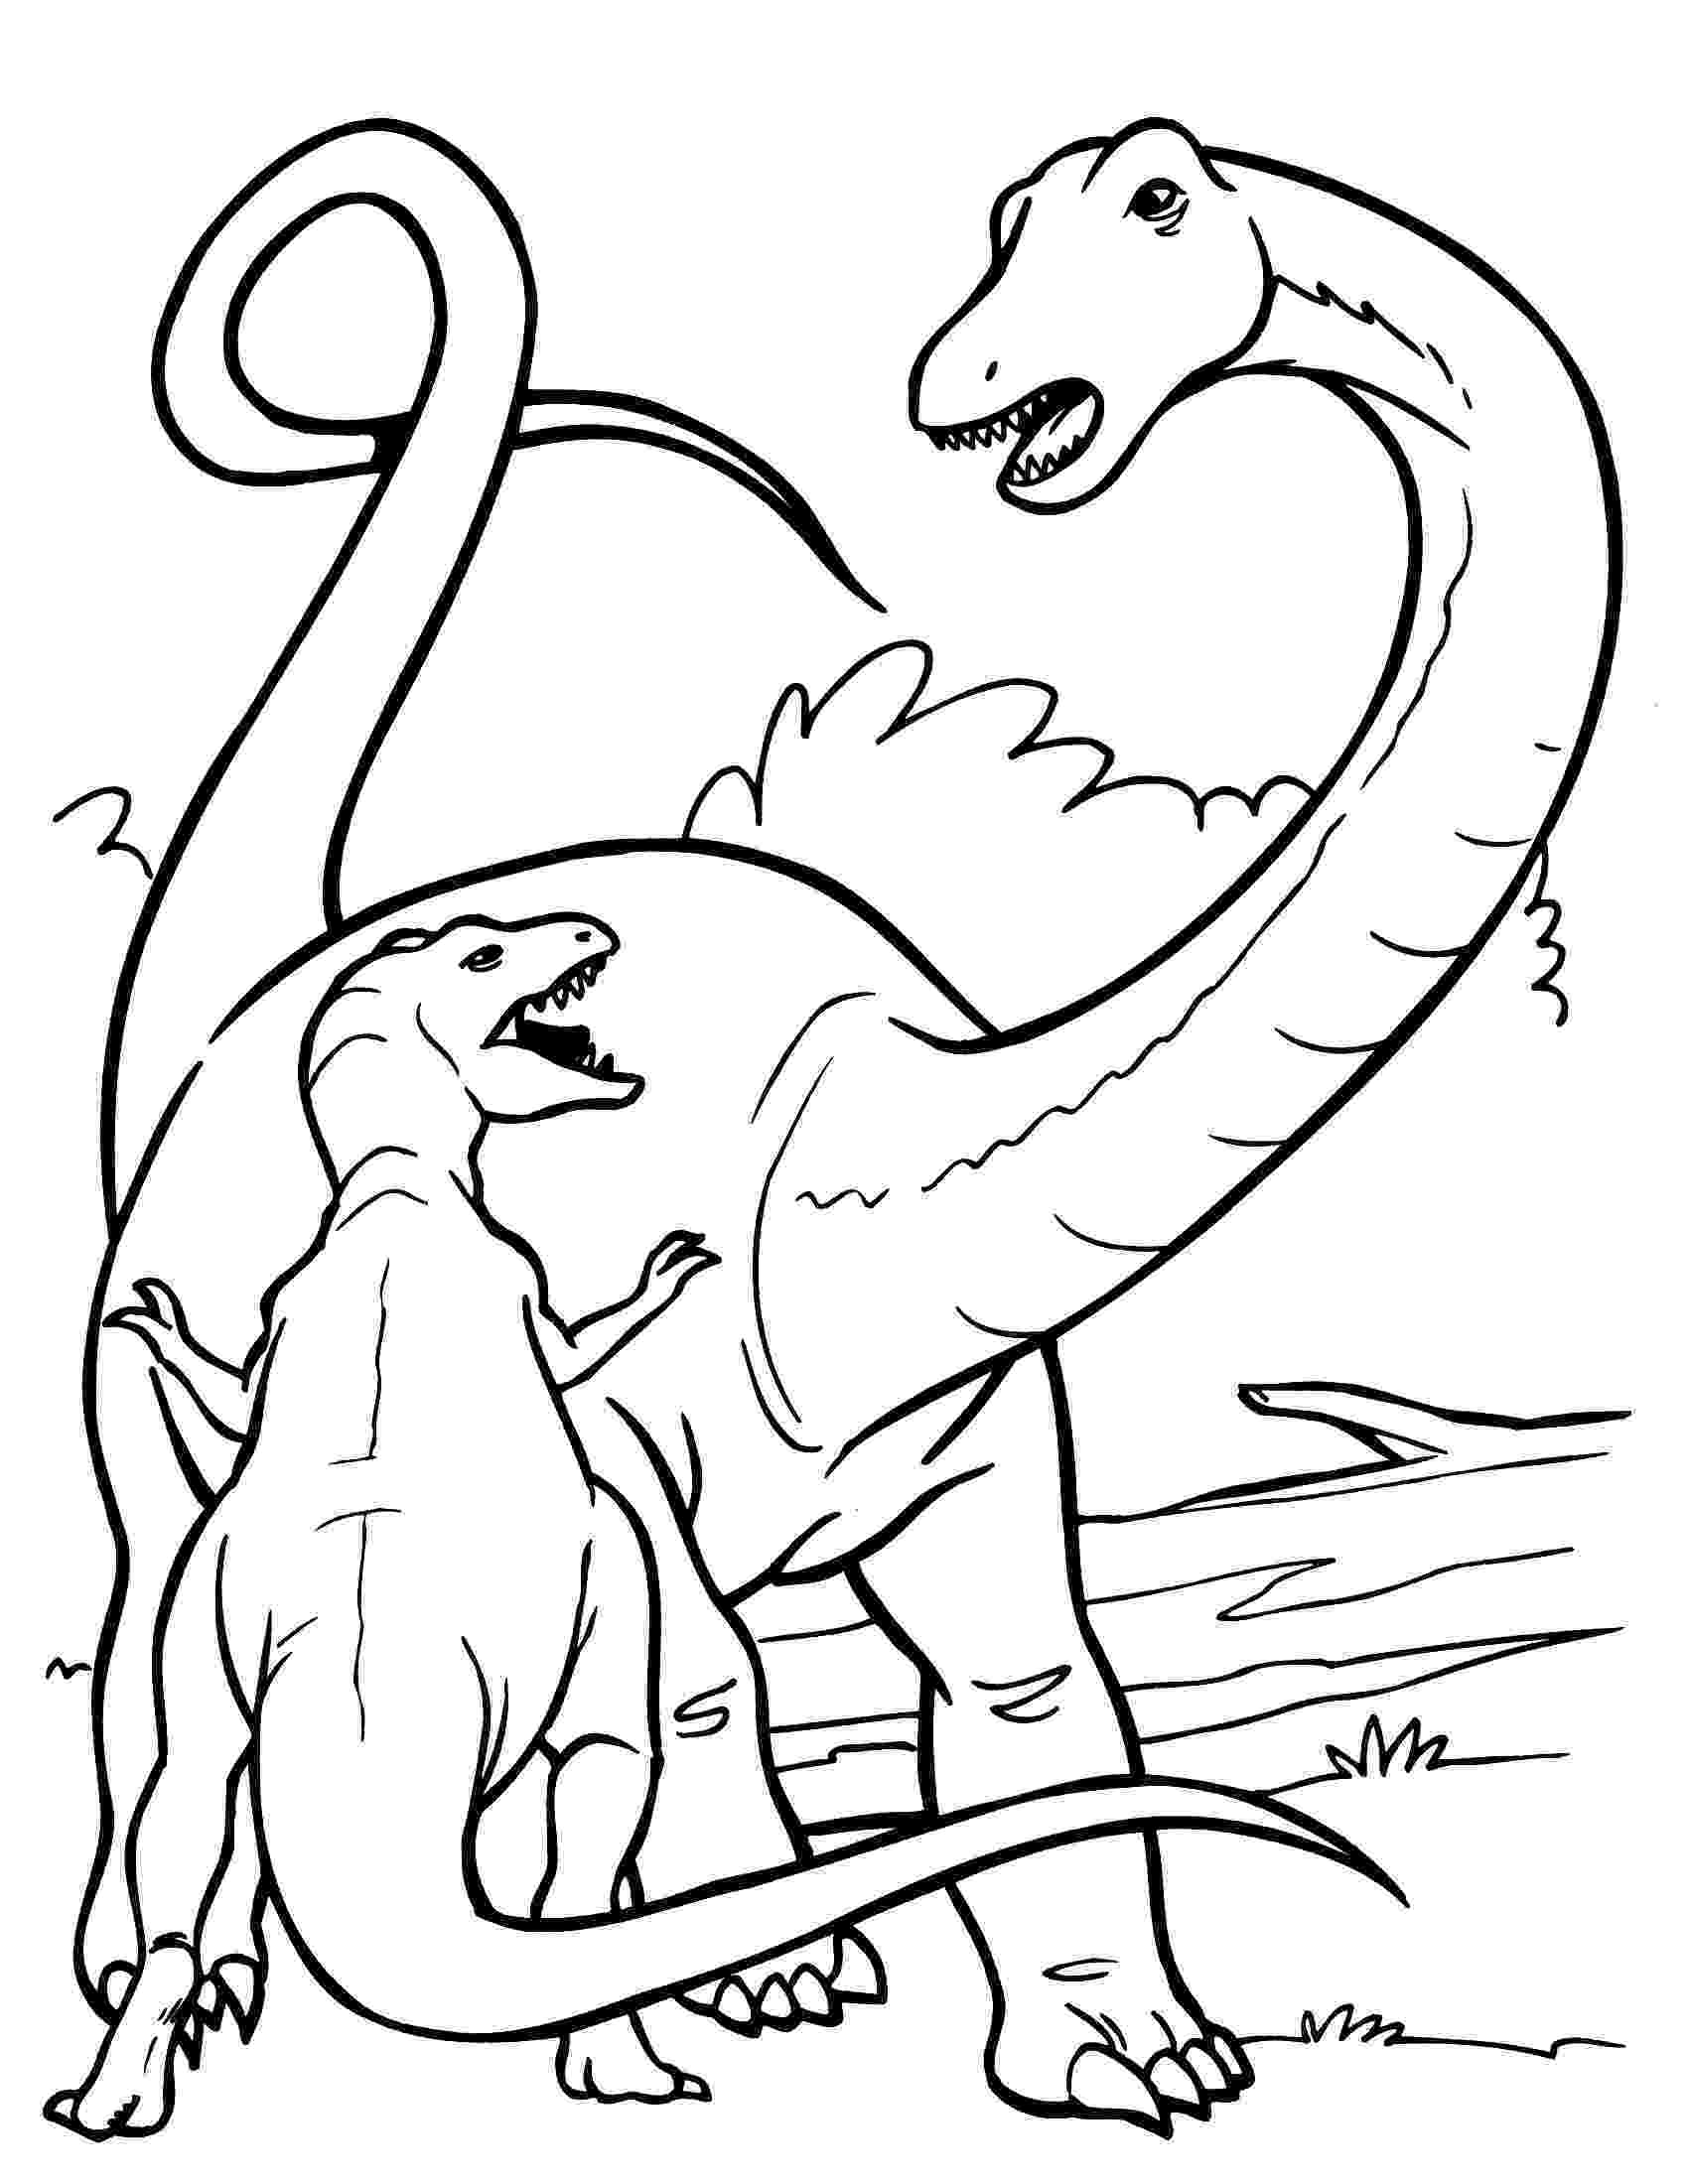 dinosaur colouring page baby dinosaur coloring pages to download and print for free dinosaur colouring page 